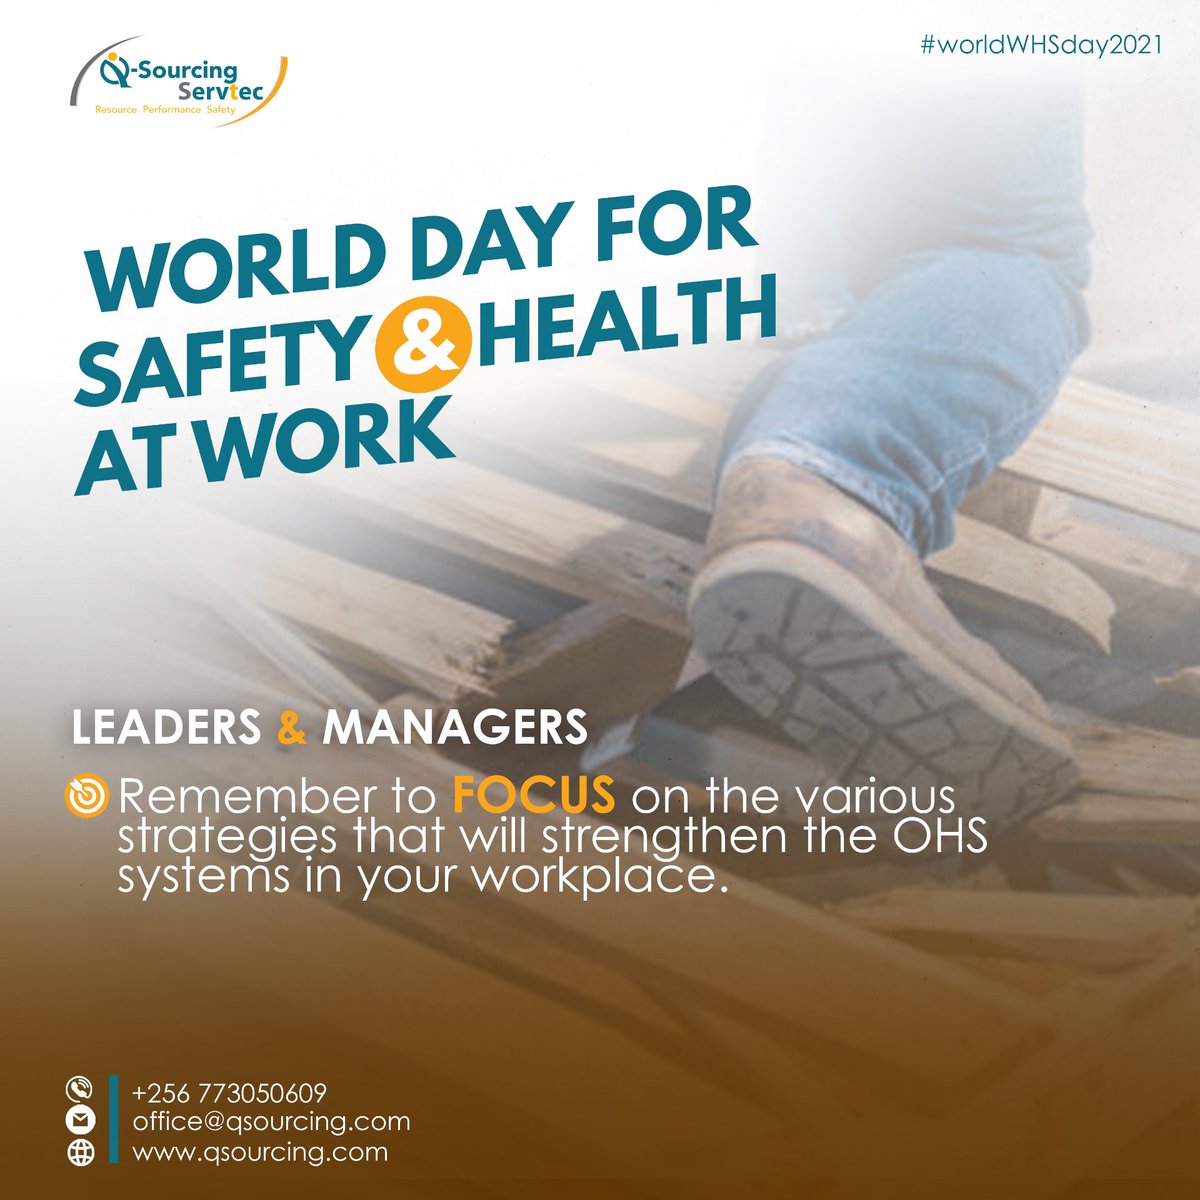 Because your team can only learn best by example!
#worldWHSday2021 #SafeDay2021